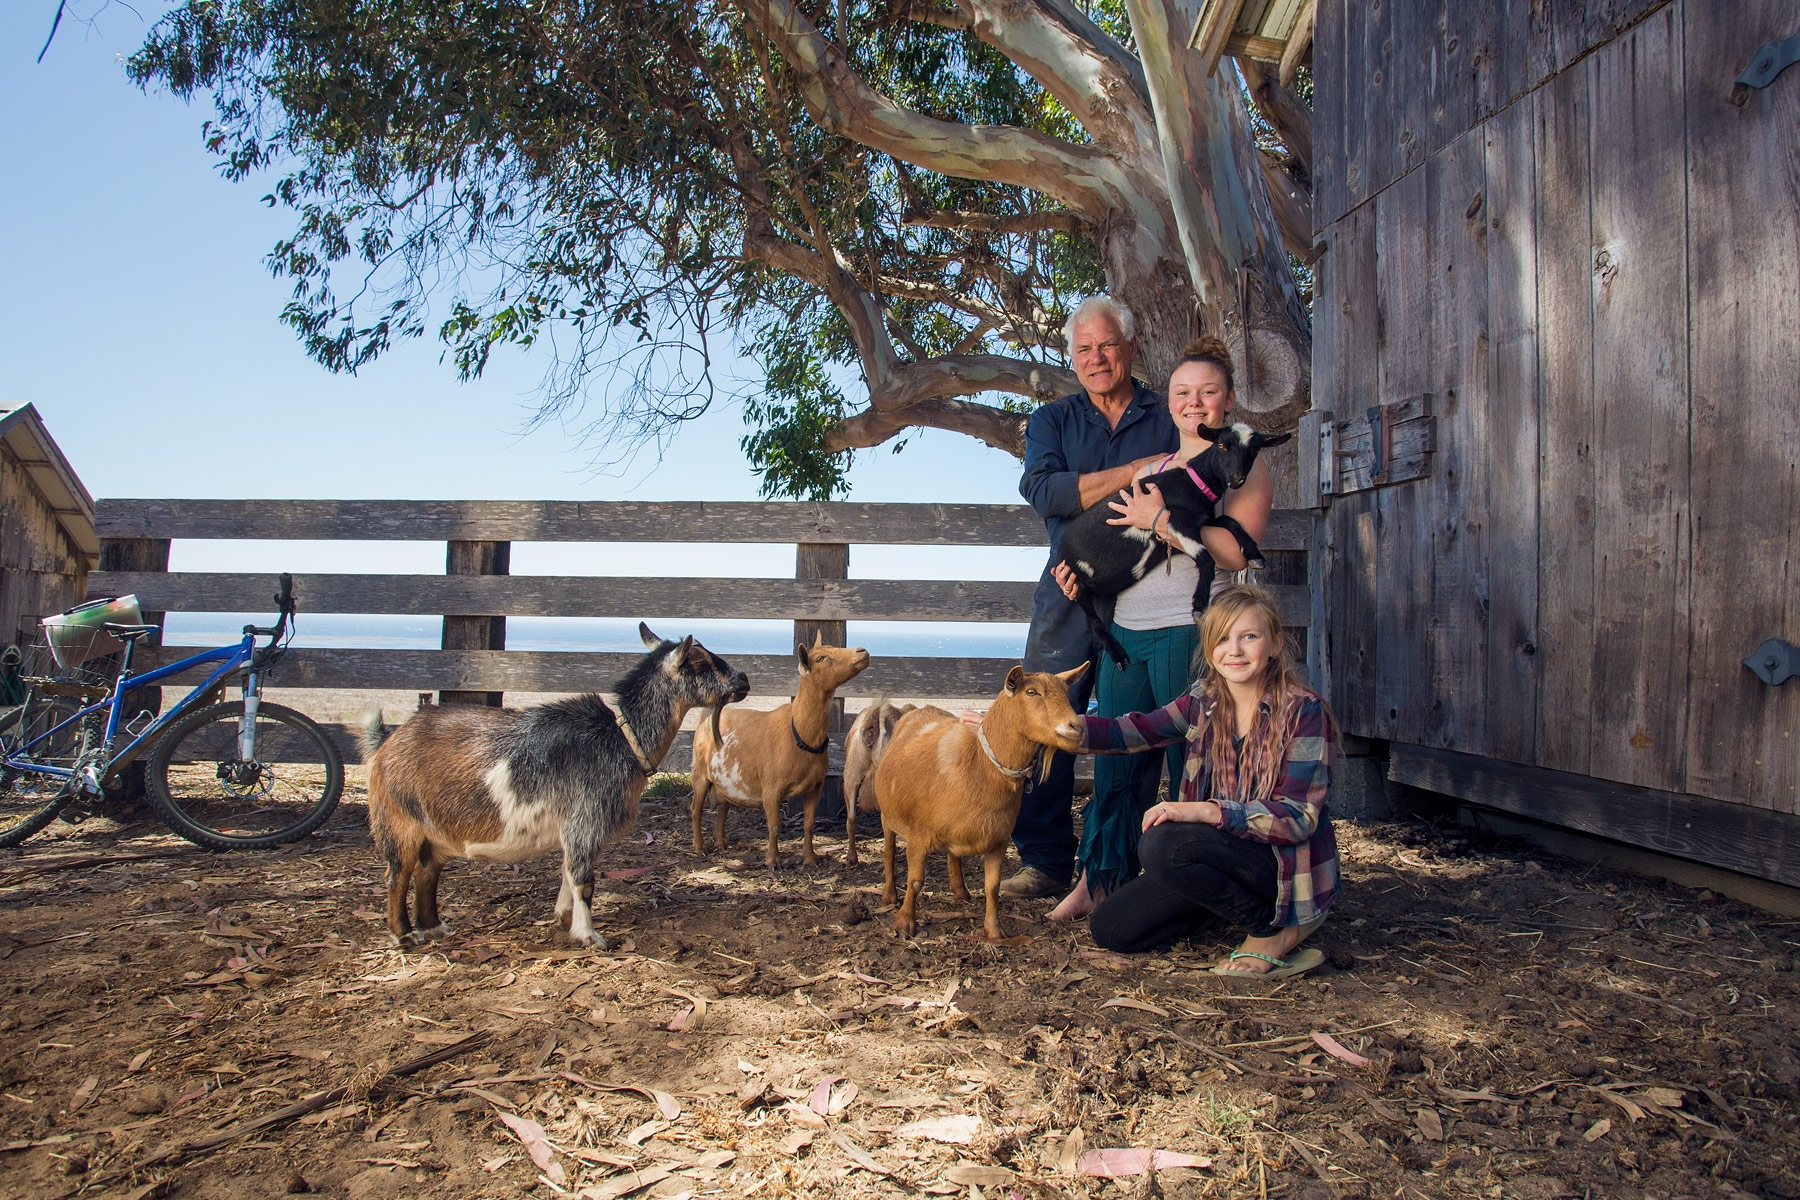 Director Don Canestro with daughters Carla, 13, and Stella, 11, and their pet goats, outside the barn near their home on KSN Norris Rancho Marino Reserve.